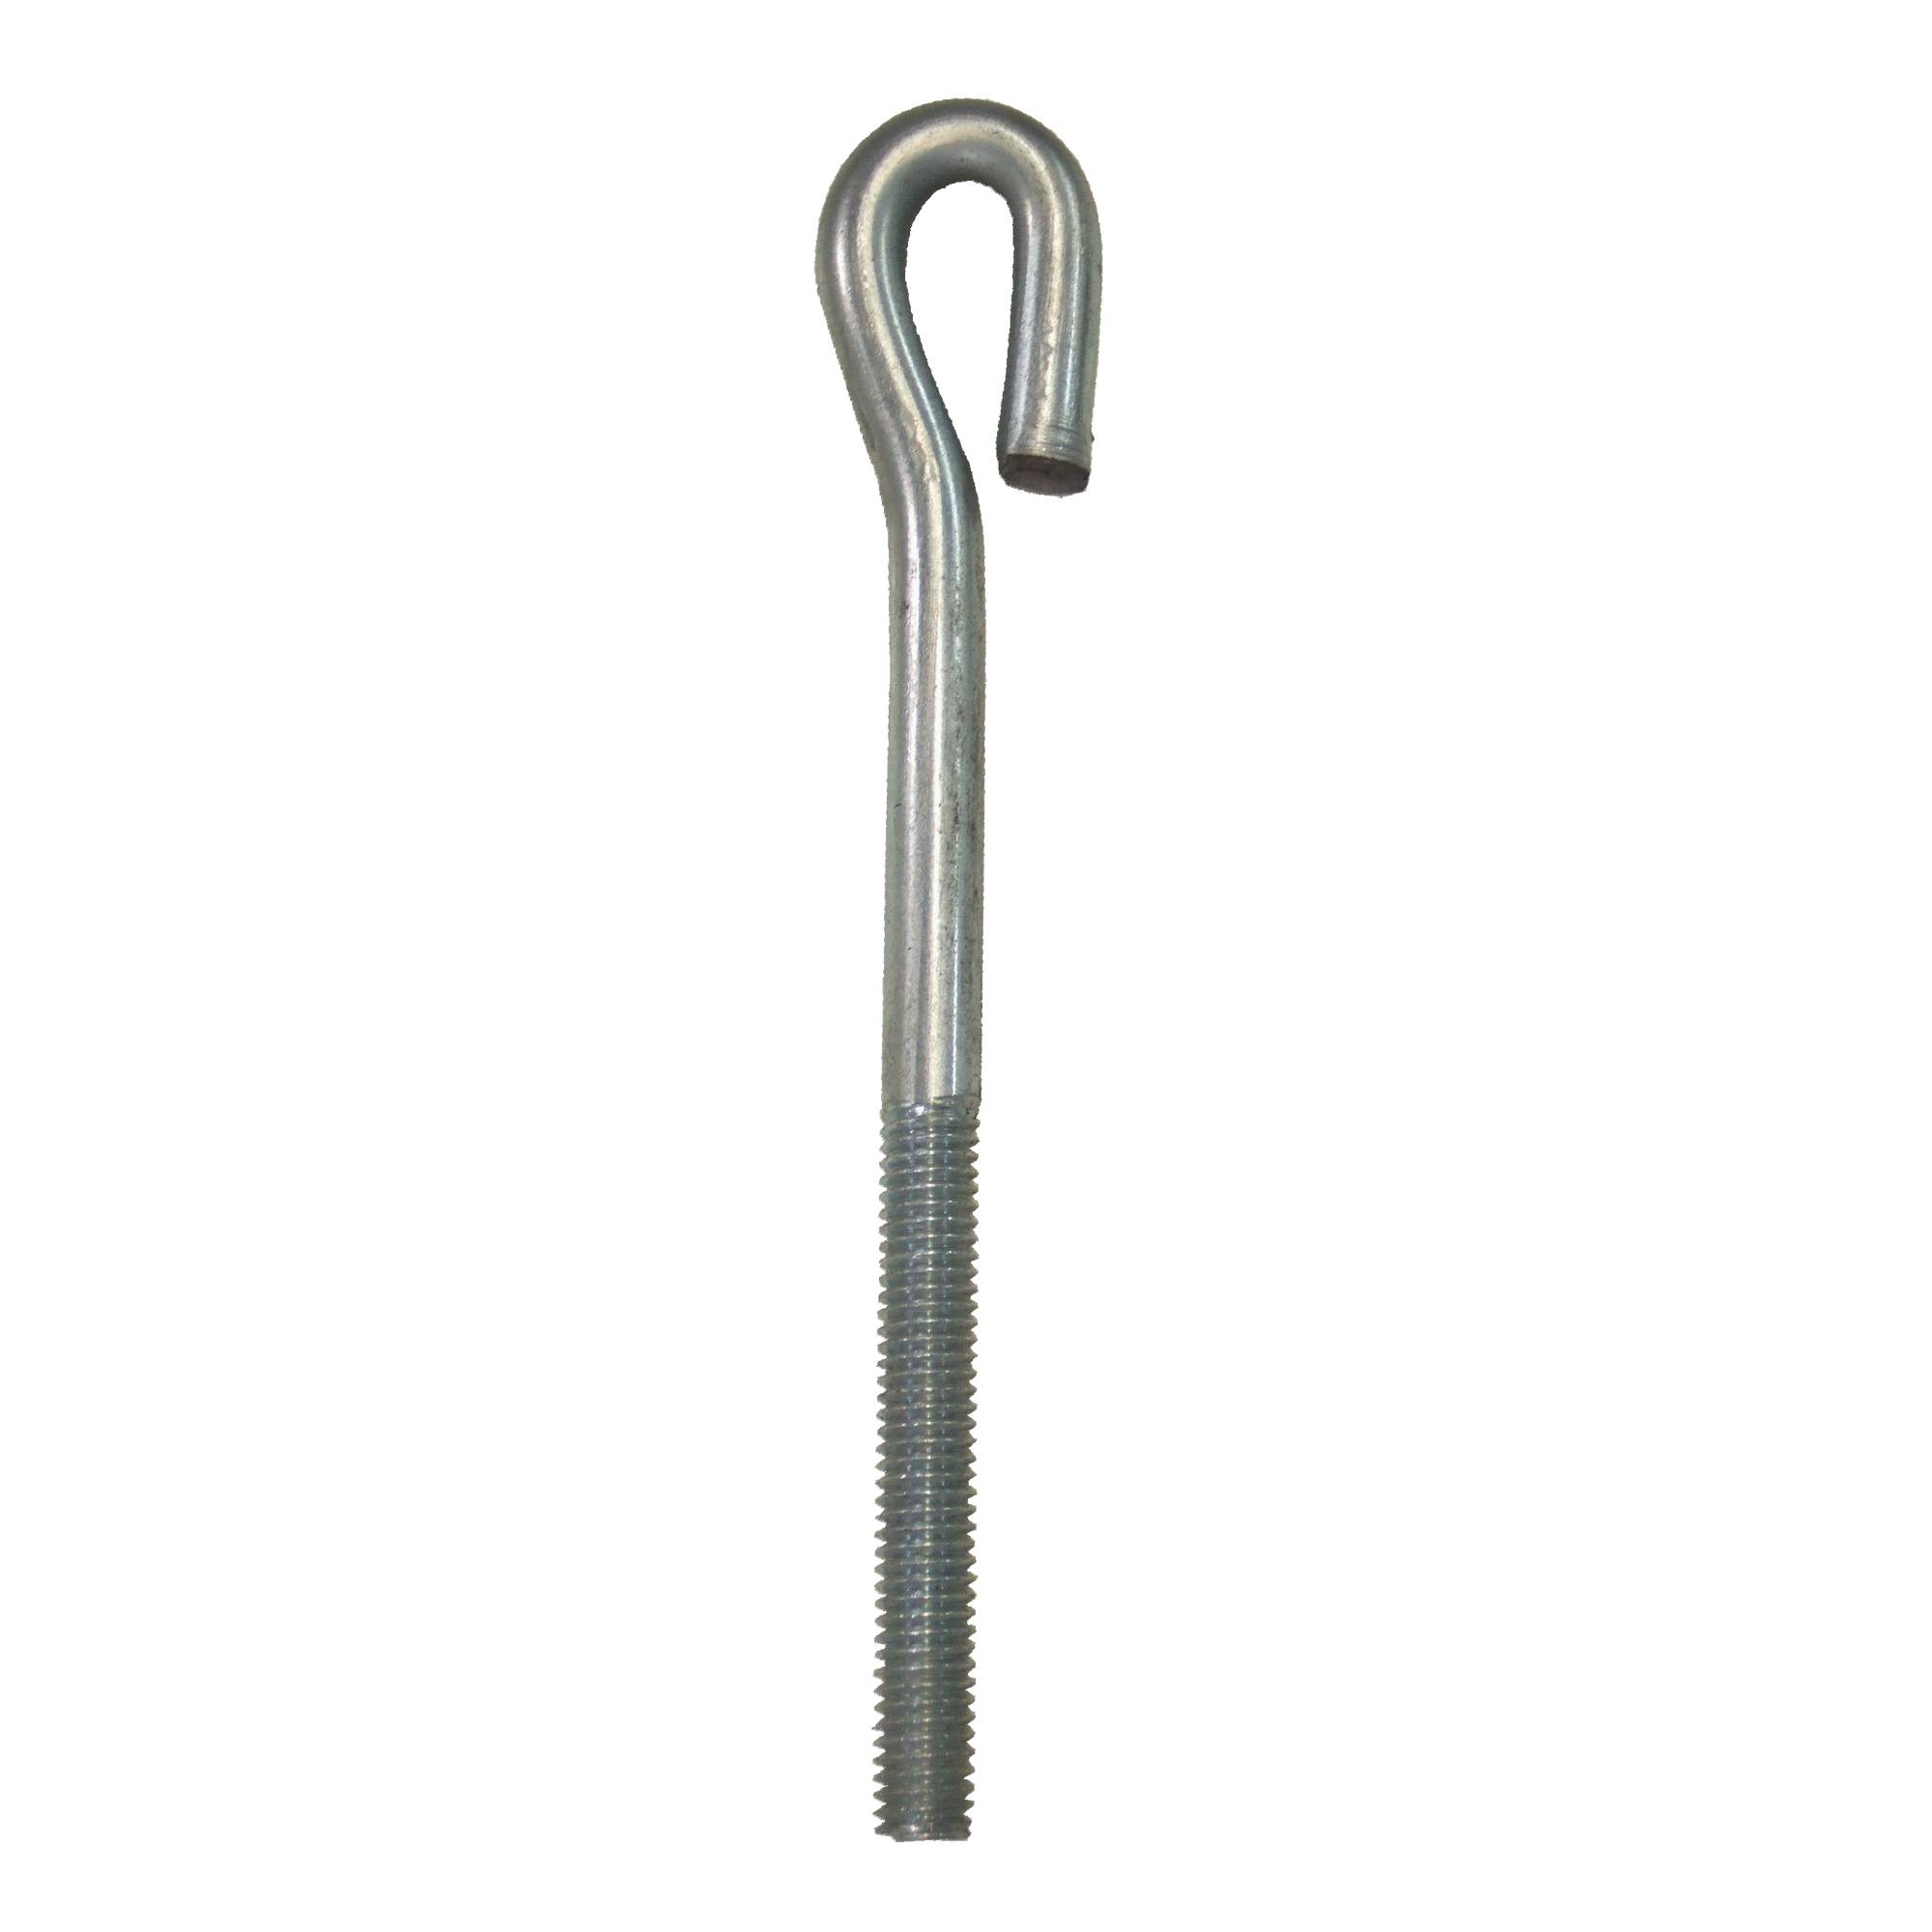 3/8 threaded rod with hook, 6-3/4 long for industrial curtain.